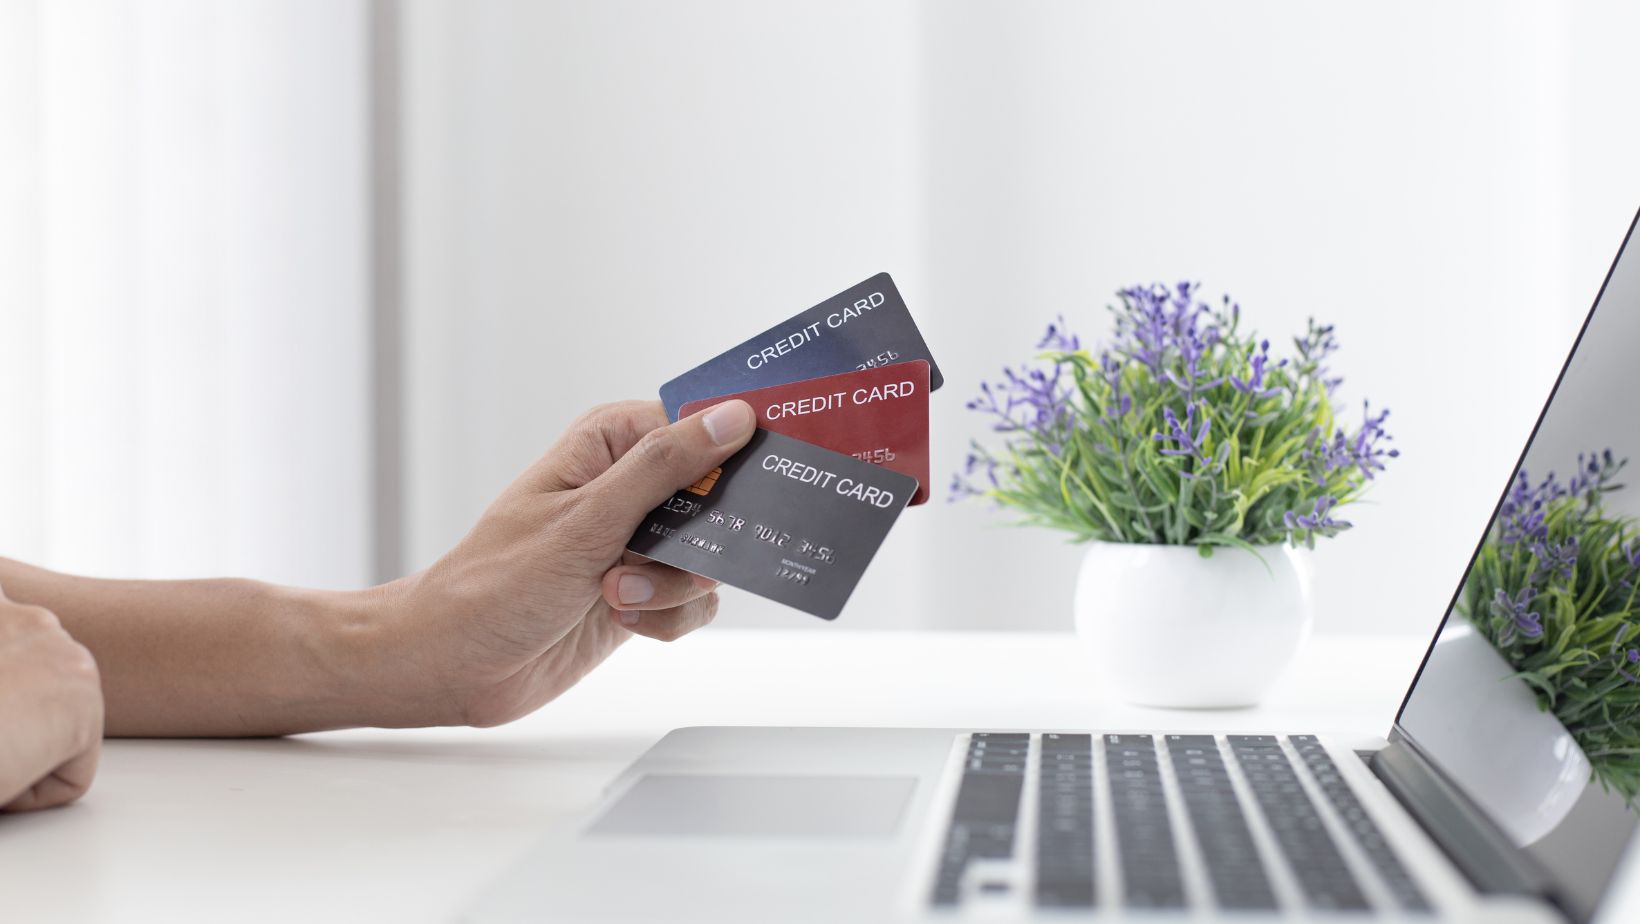 5 Tips to Use Your Credit Card Responsibly